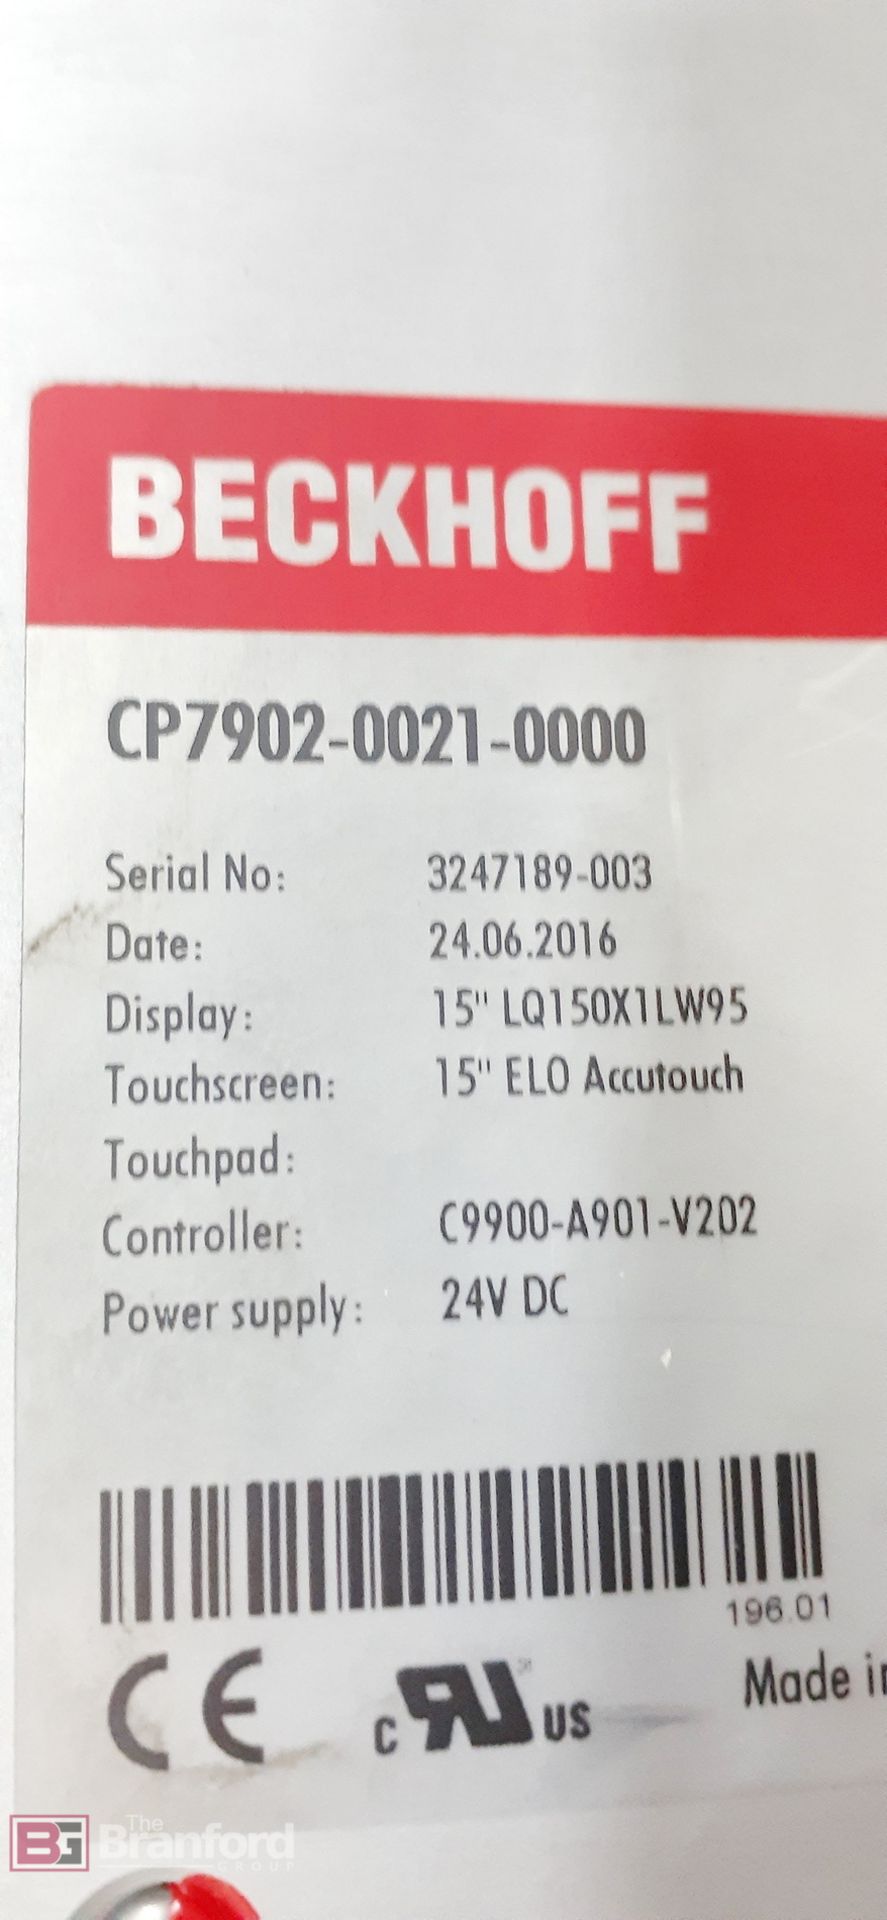 Beckhoff Model CP7902-0021-0000, 15" Touchscreen Monitor - Image 6 of 6